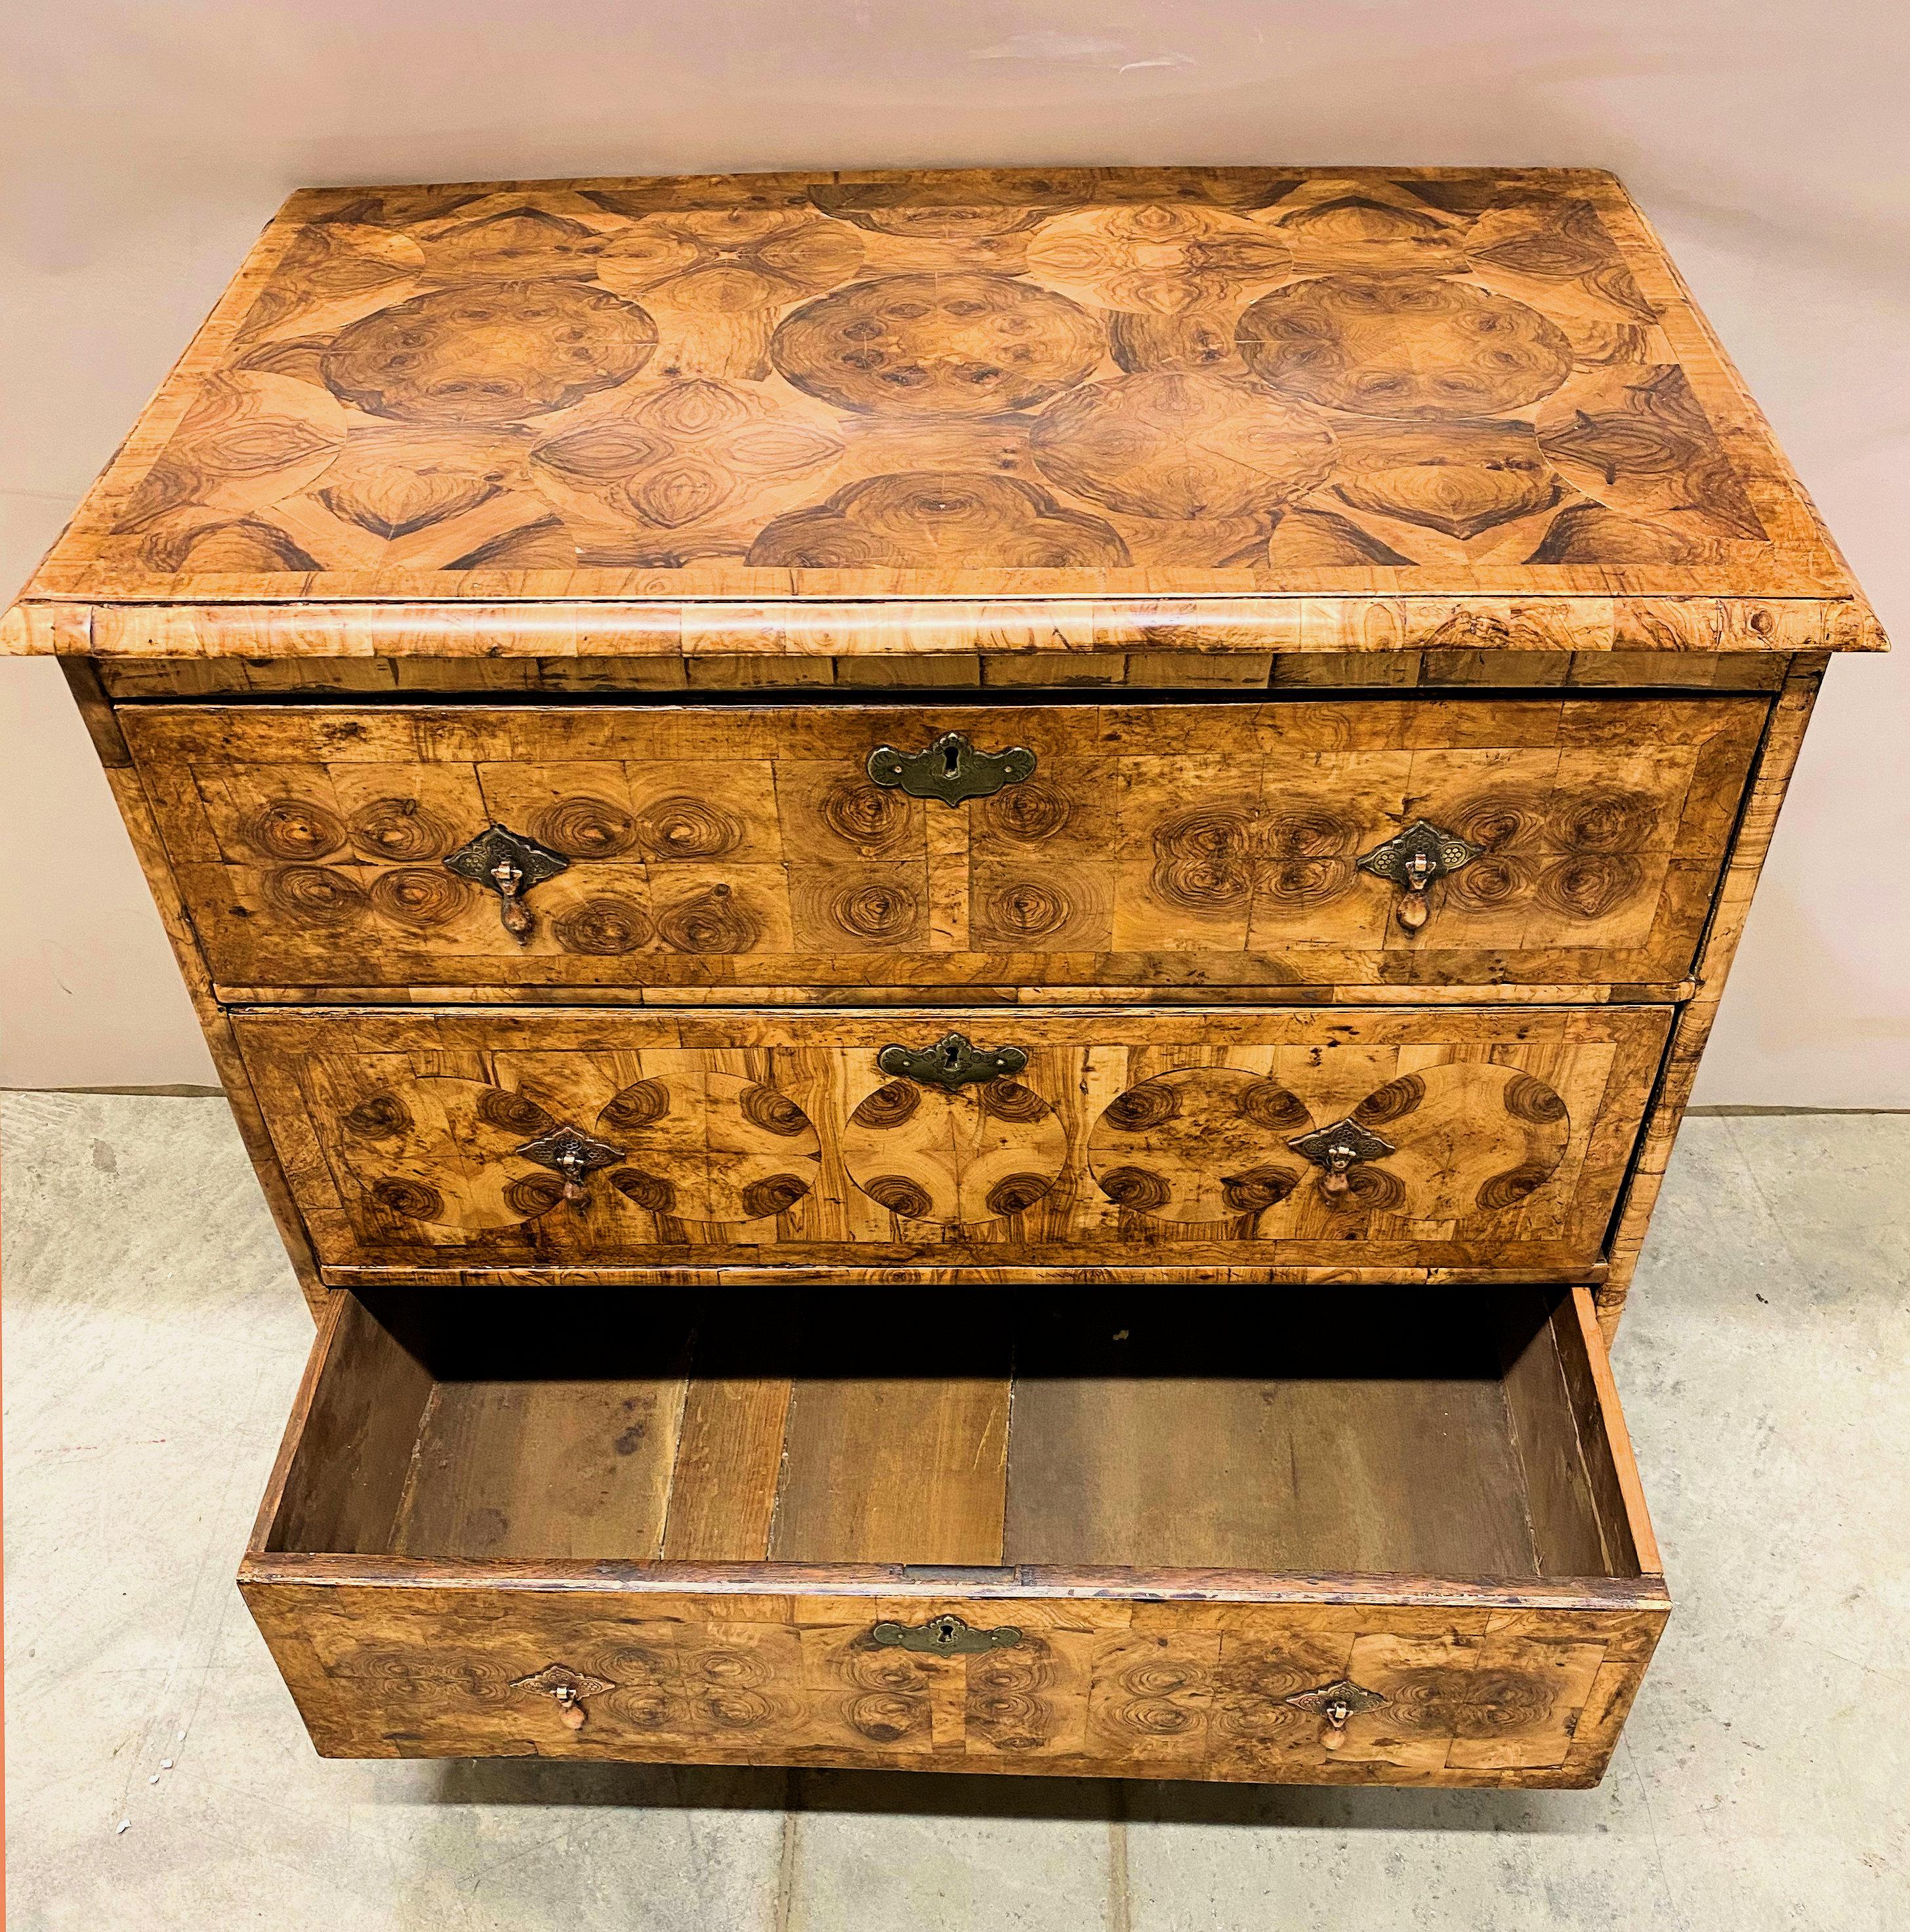 This beautiful and well proportioned mid 18th Century Chest of drawers has been very sympathetically re-veneered and has had the handles replaced. The chest itself is oak, and is dated to approximately 1740. The chest of drawers is comprised of 3